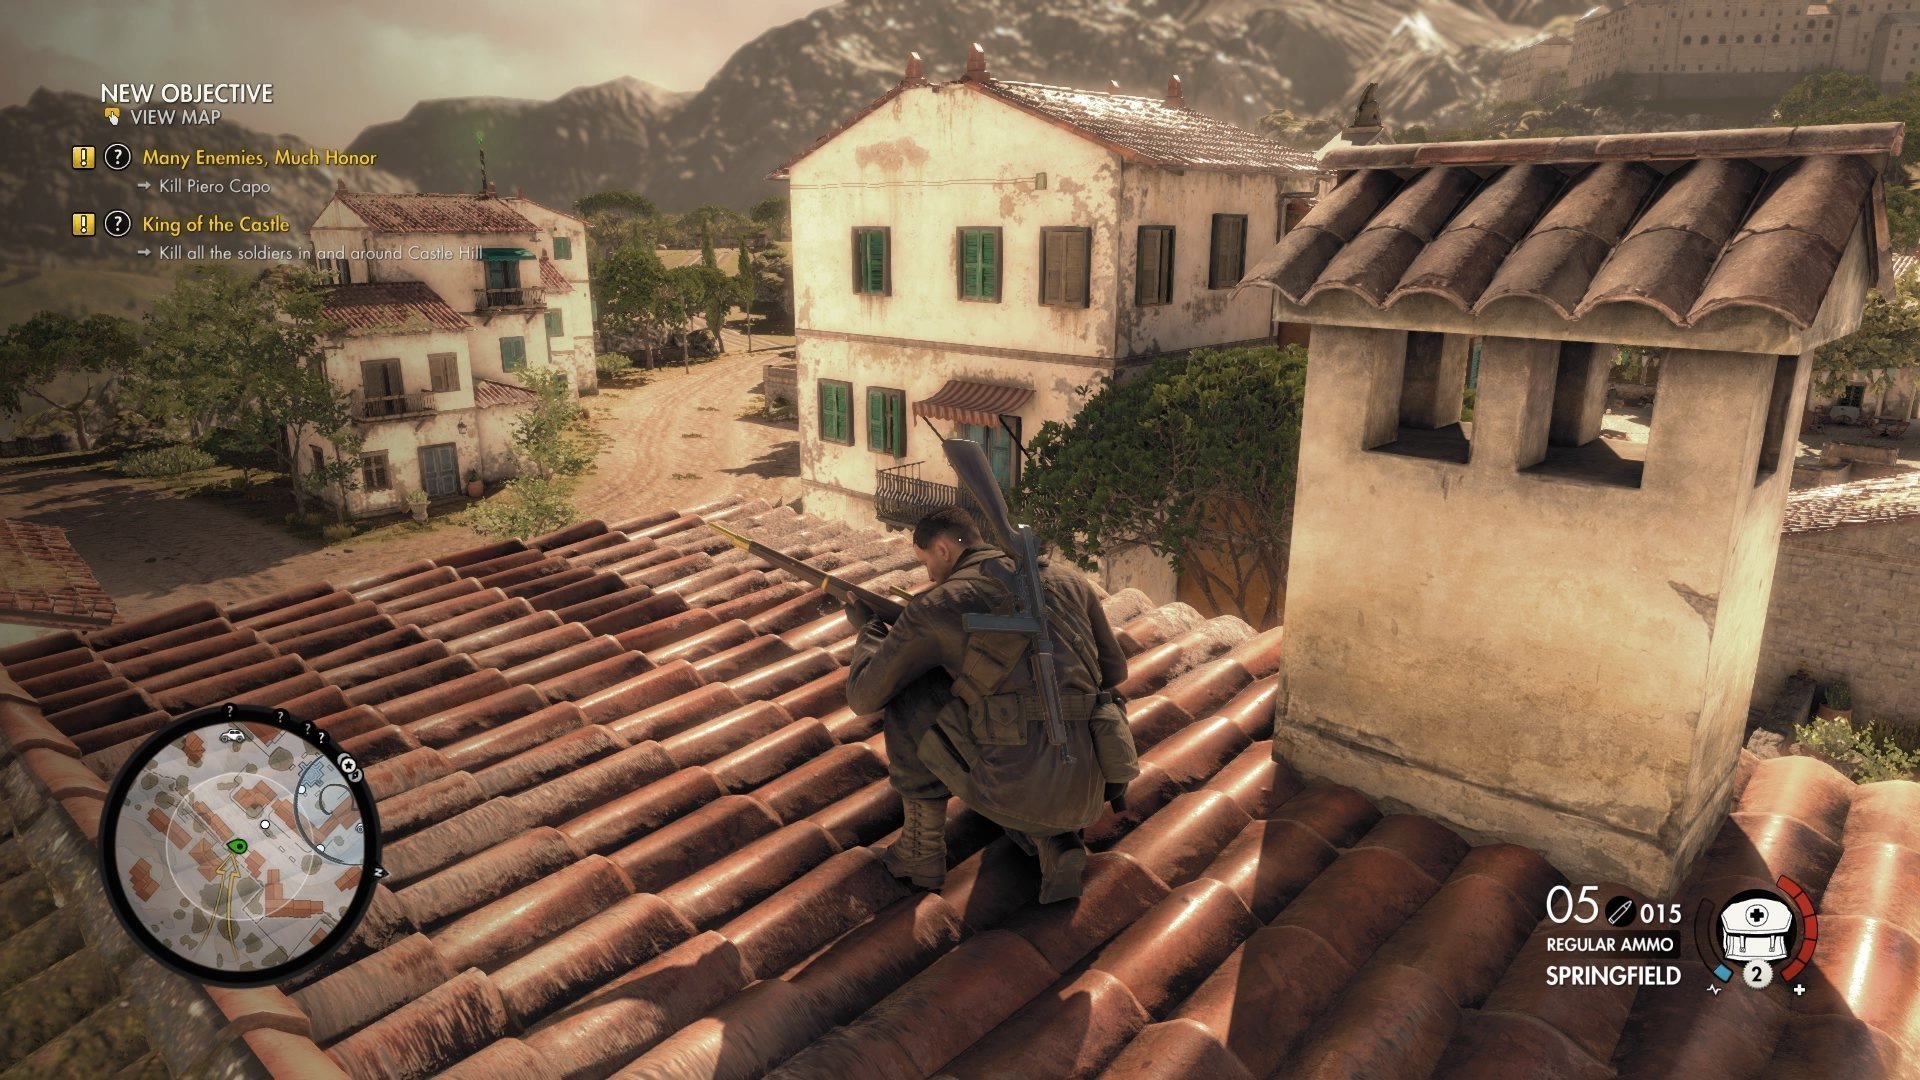 Sniper Elite V4 Review (PlayStation 4) - Official GBAtemp Review |  GBAtemp.net - The Independent Video Game Community